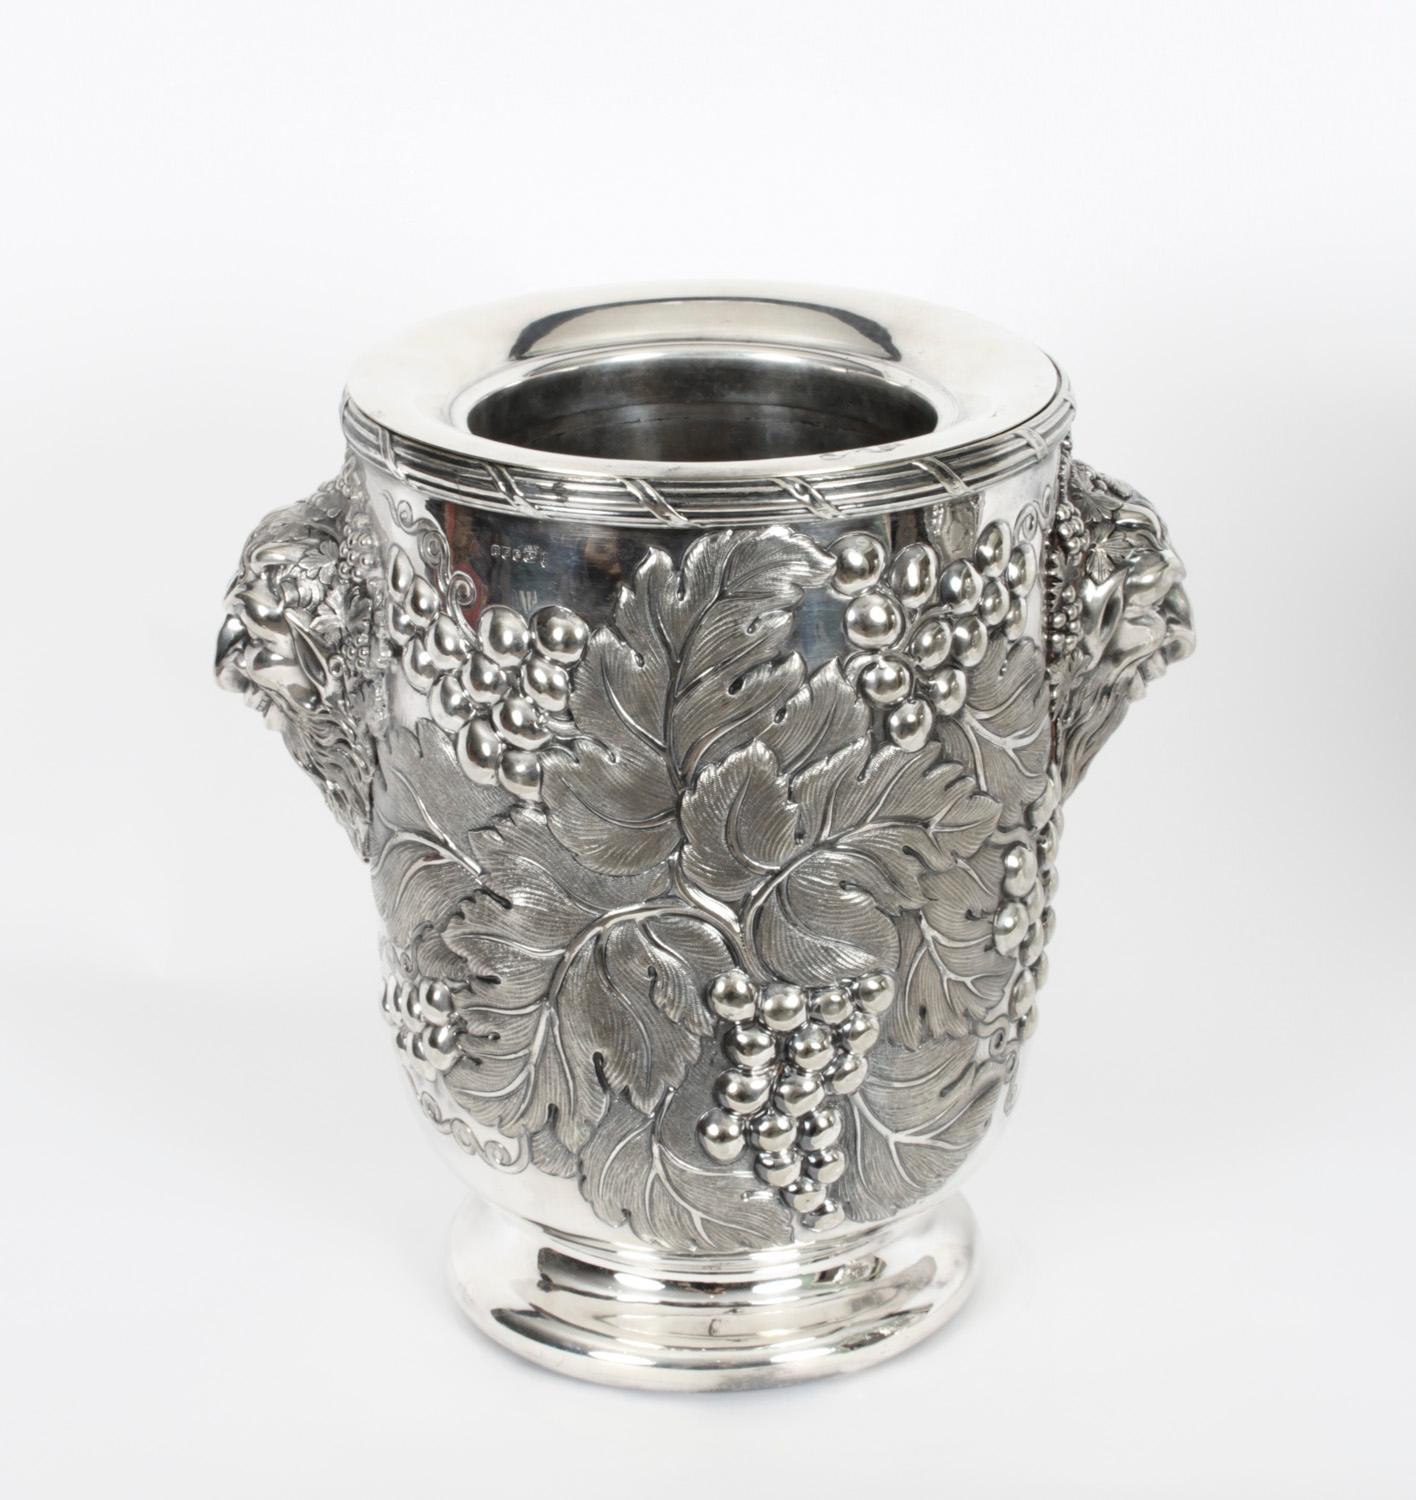 This is an exceptional pair of antique English silver plated wine coolers by the renowned silversmith Hawksworth, Eyre & Co of Sheffield, circa 1870 in date.
 
The wine coolers stand on circular pedestal bases with decorative Faustian masque